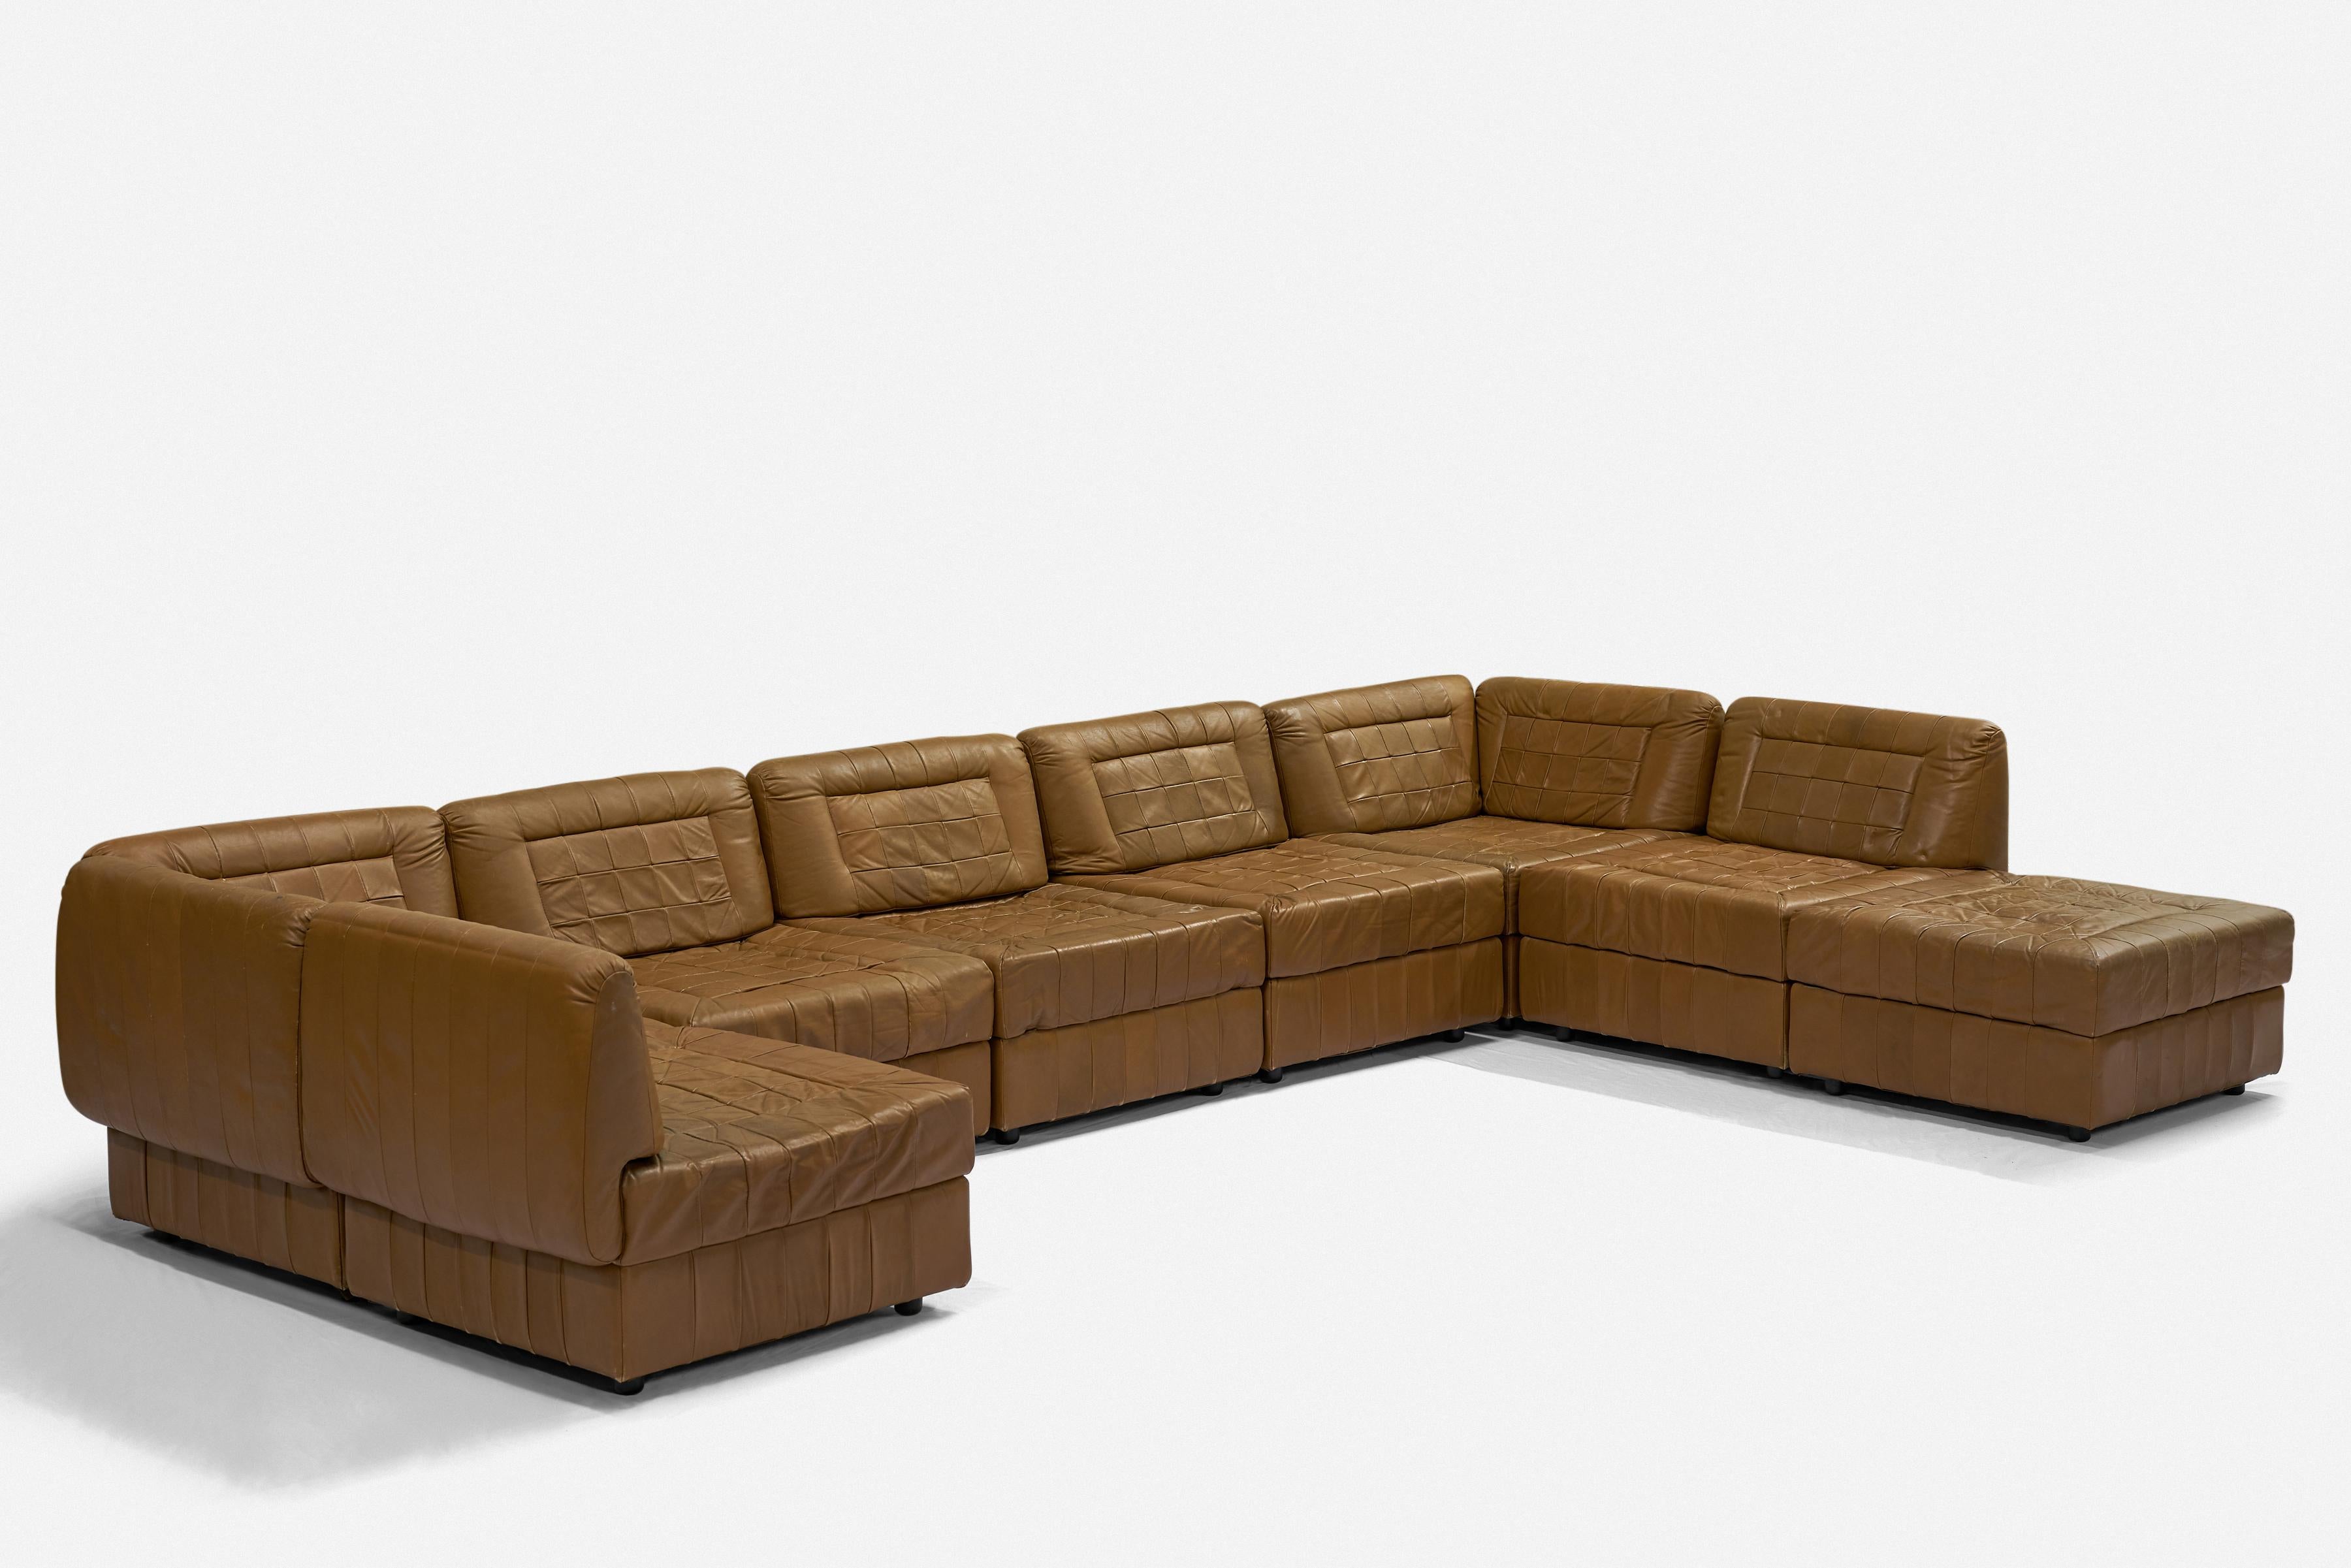 Percival Lafer
Modular sectional / Lounge chairs
Lafer S.A. Ind. Com.
Brazil, c. 1970

Percival Lafer sectional sofa has eight seats/ottomans and nine backrests. It can be split into numerous arrangements i.e., sectional, sectional w. ottoman, sofa